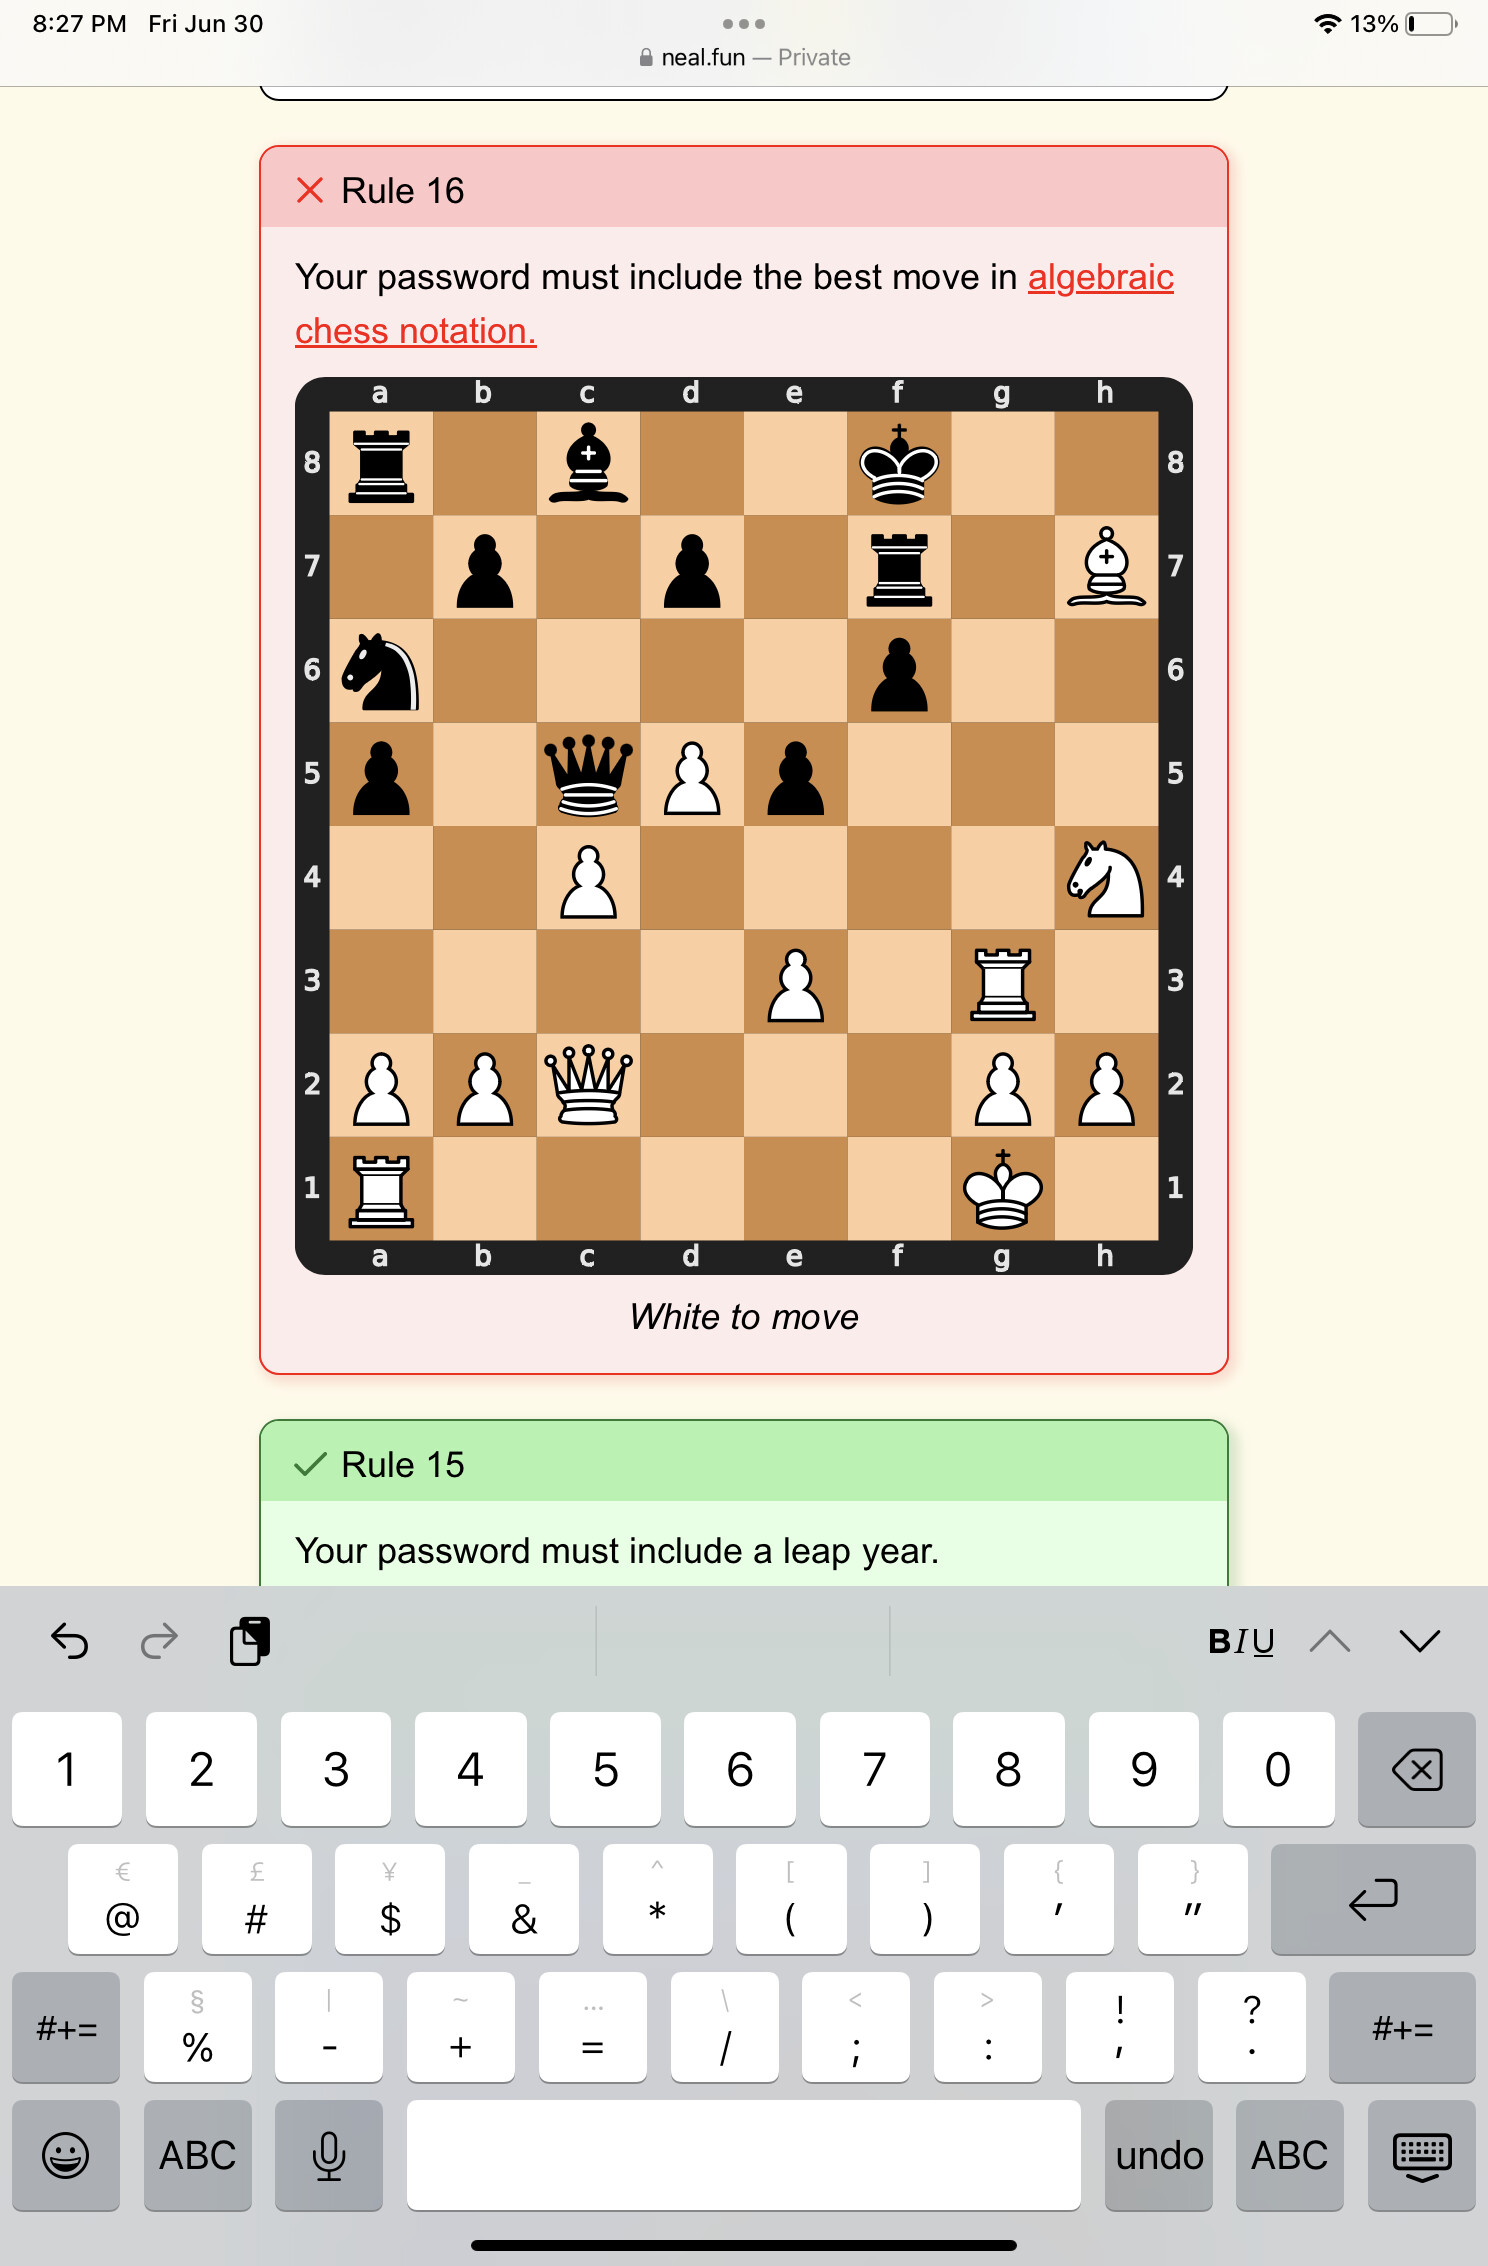 Password Game Rule 16: Best Move in Algebraic Chess Notation